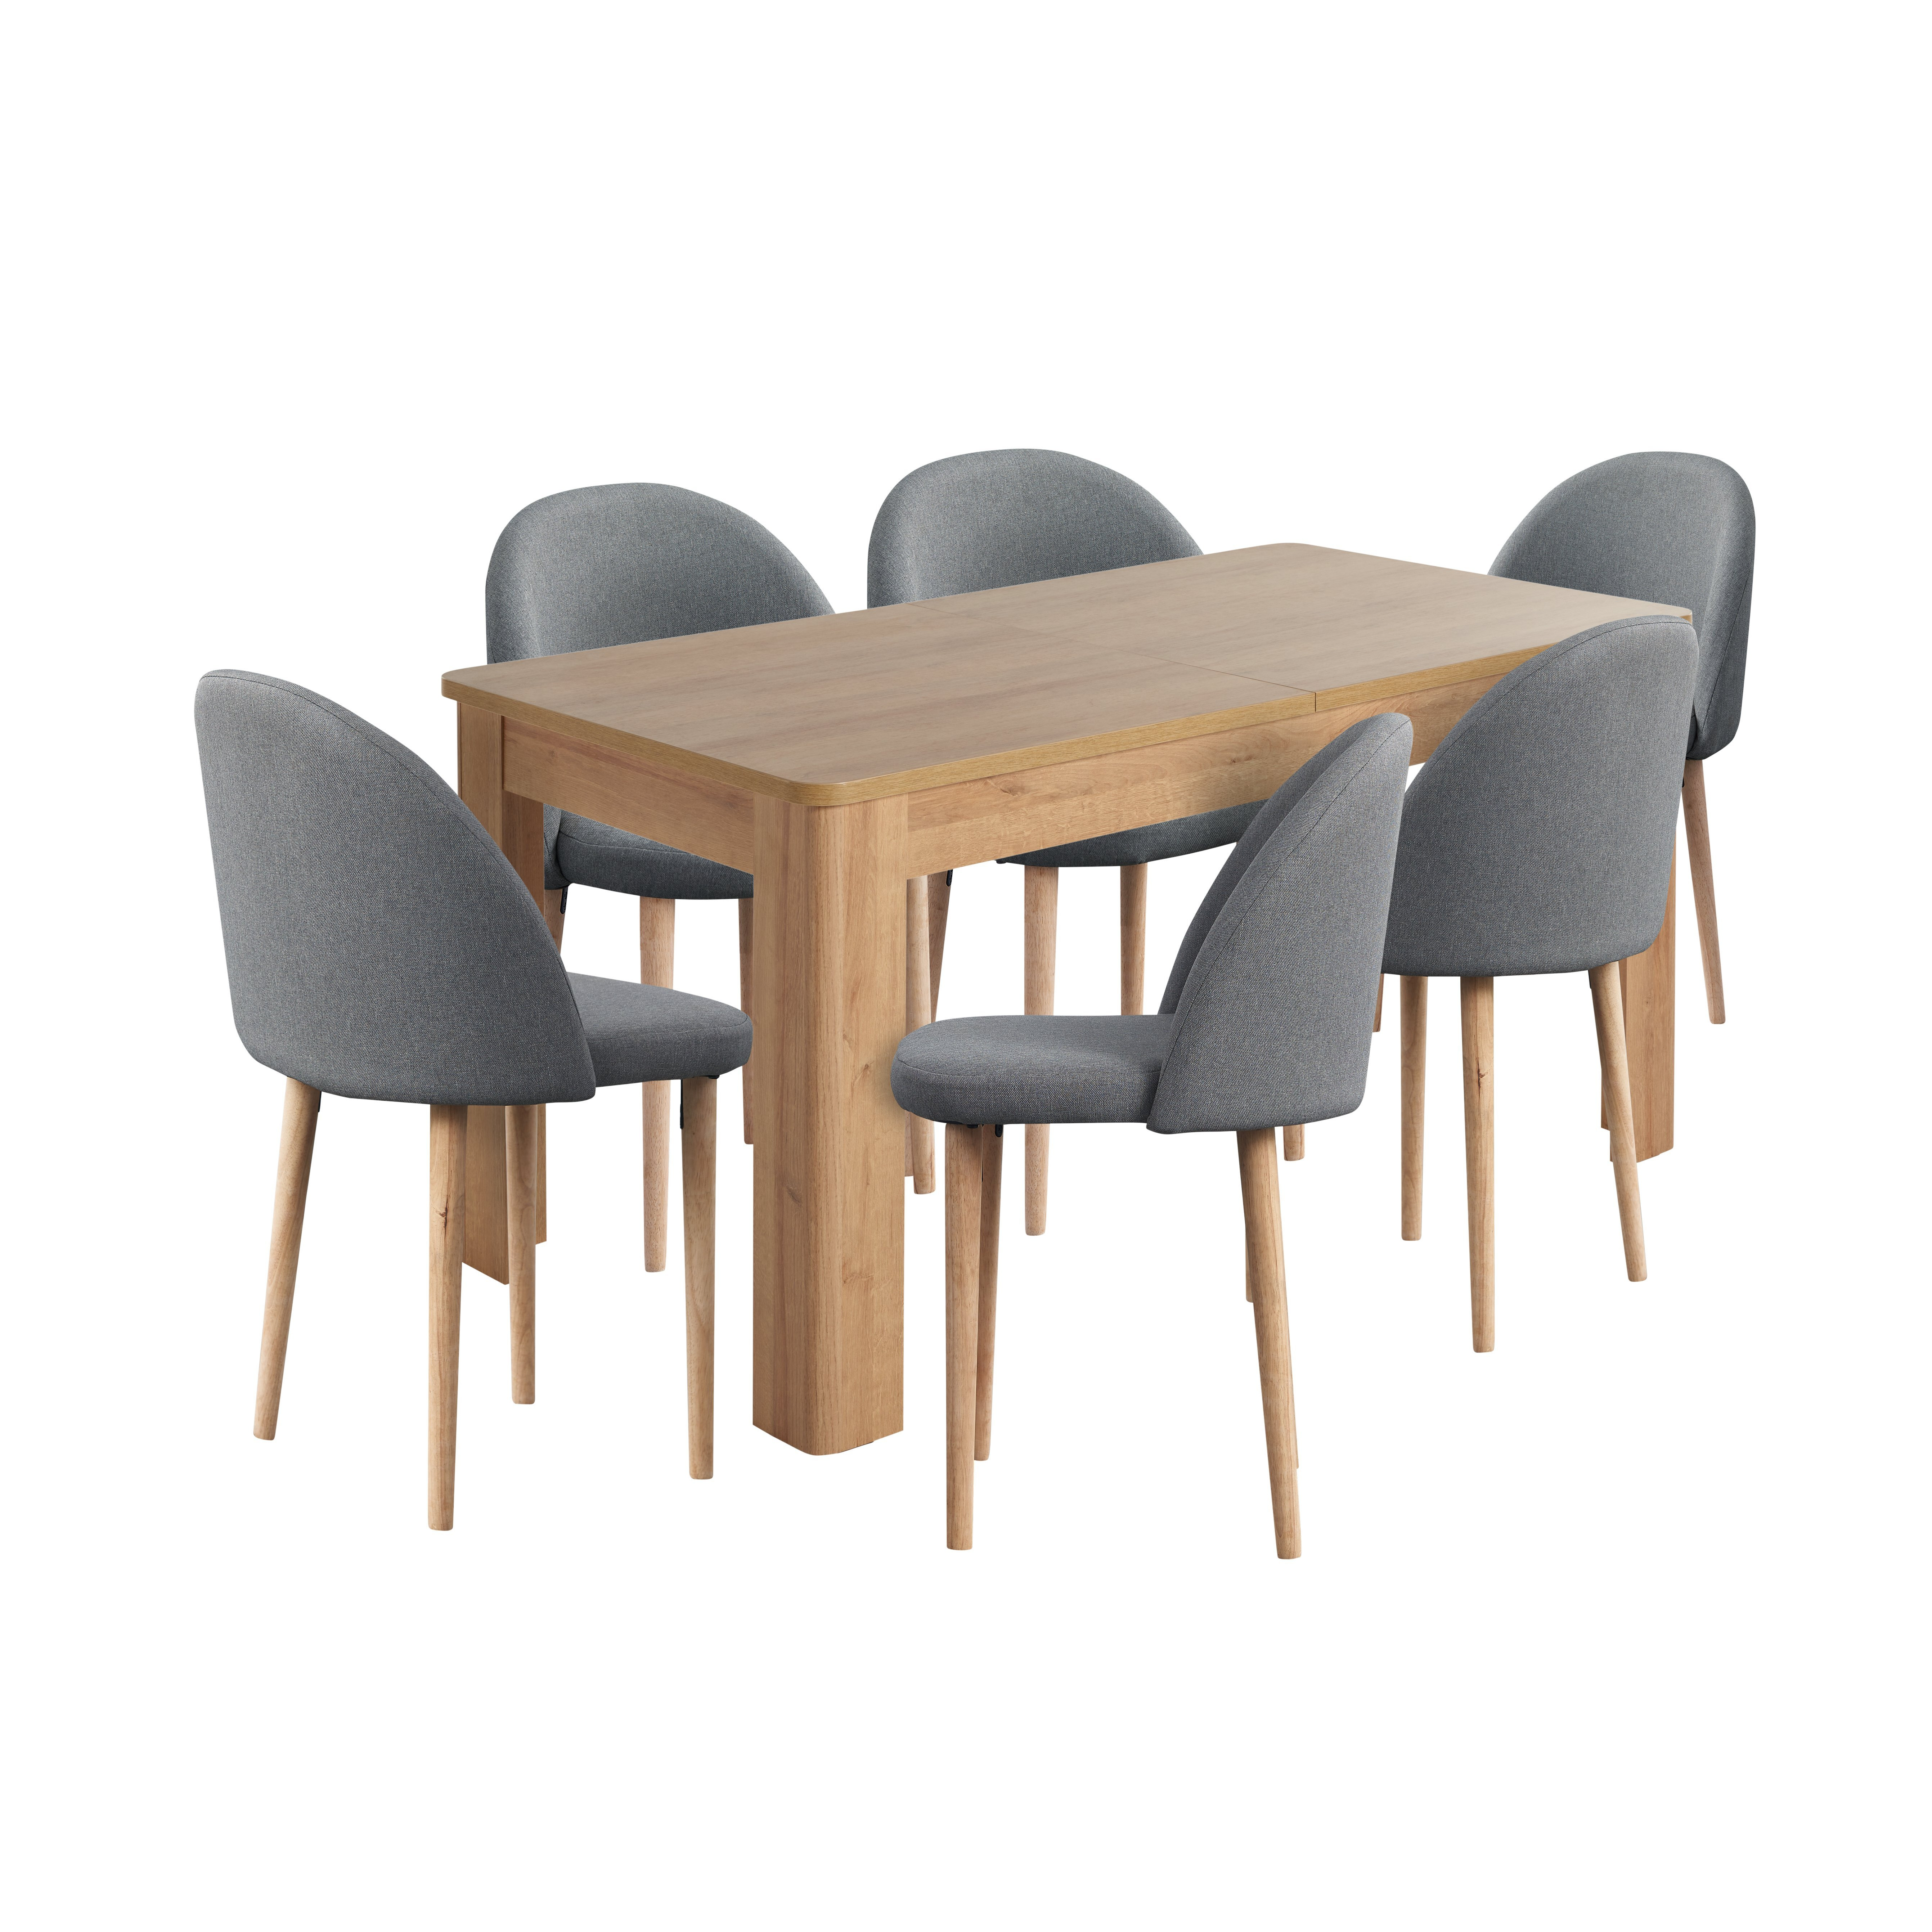 Argos Home Miami Extending Dining Table & 6 Grey Chairs - image 1